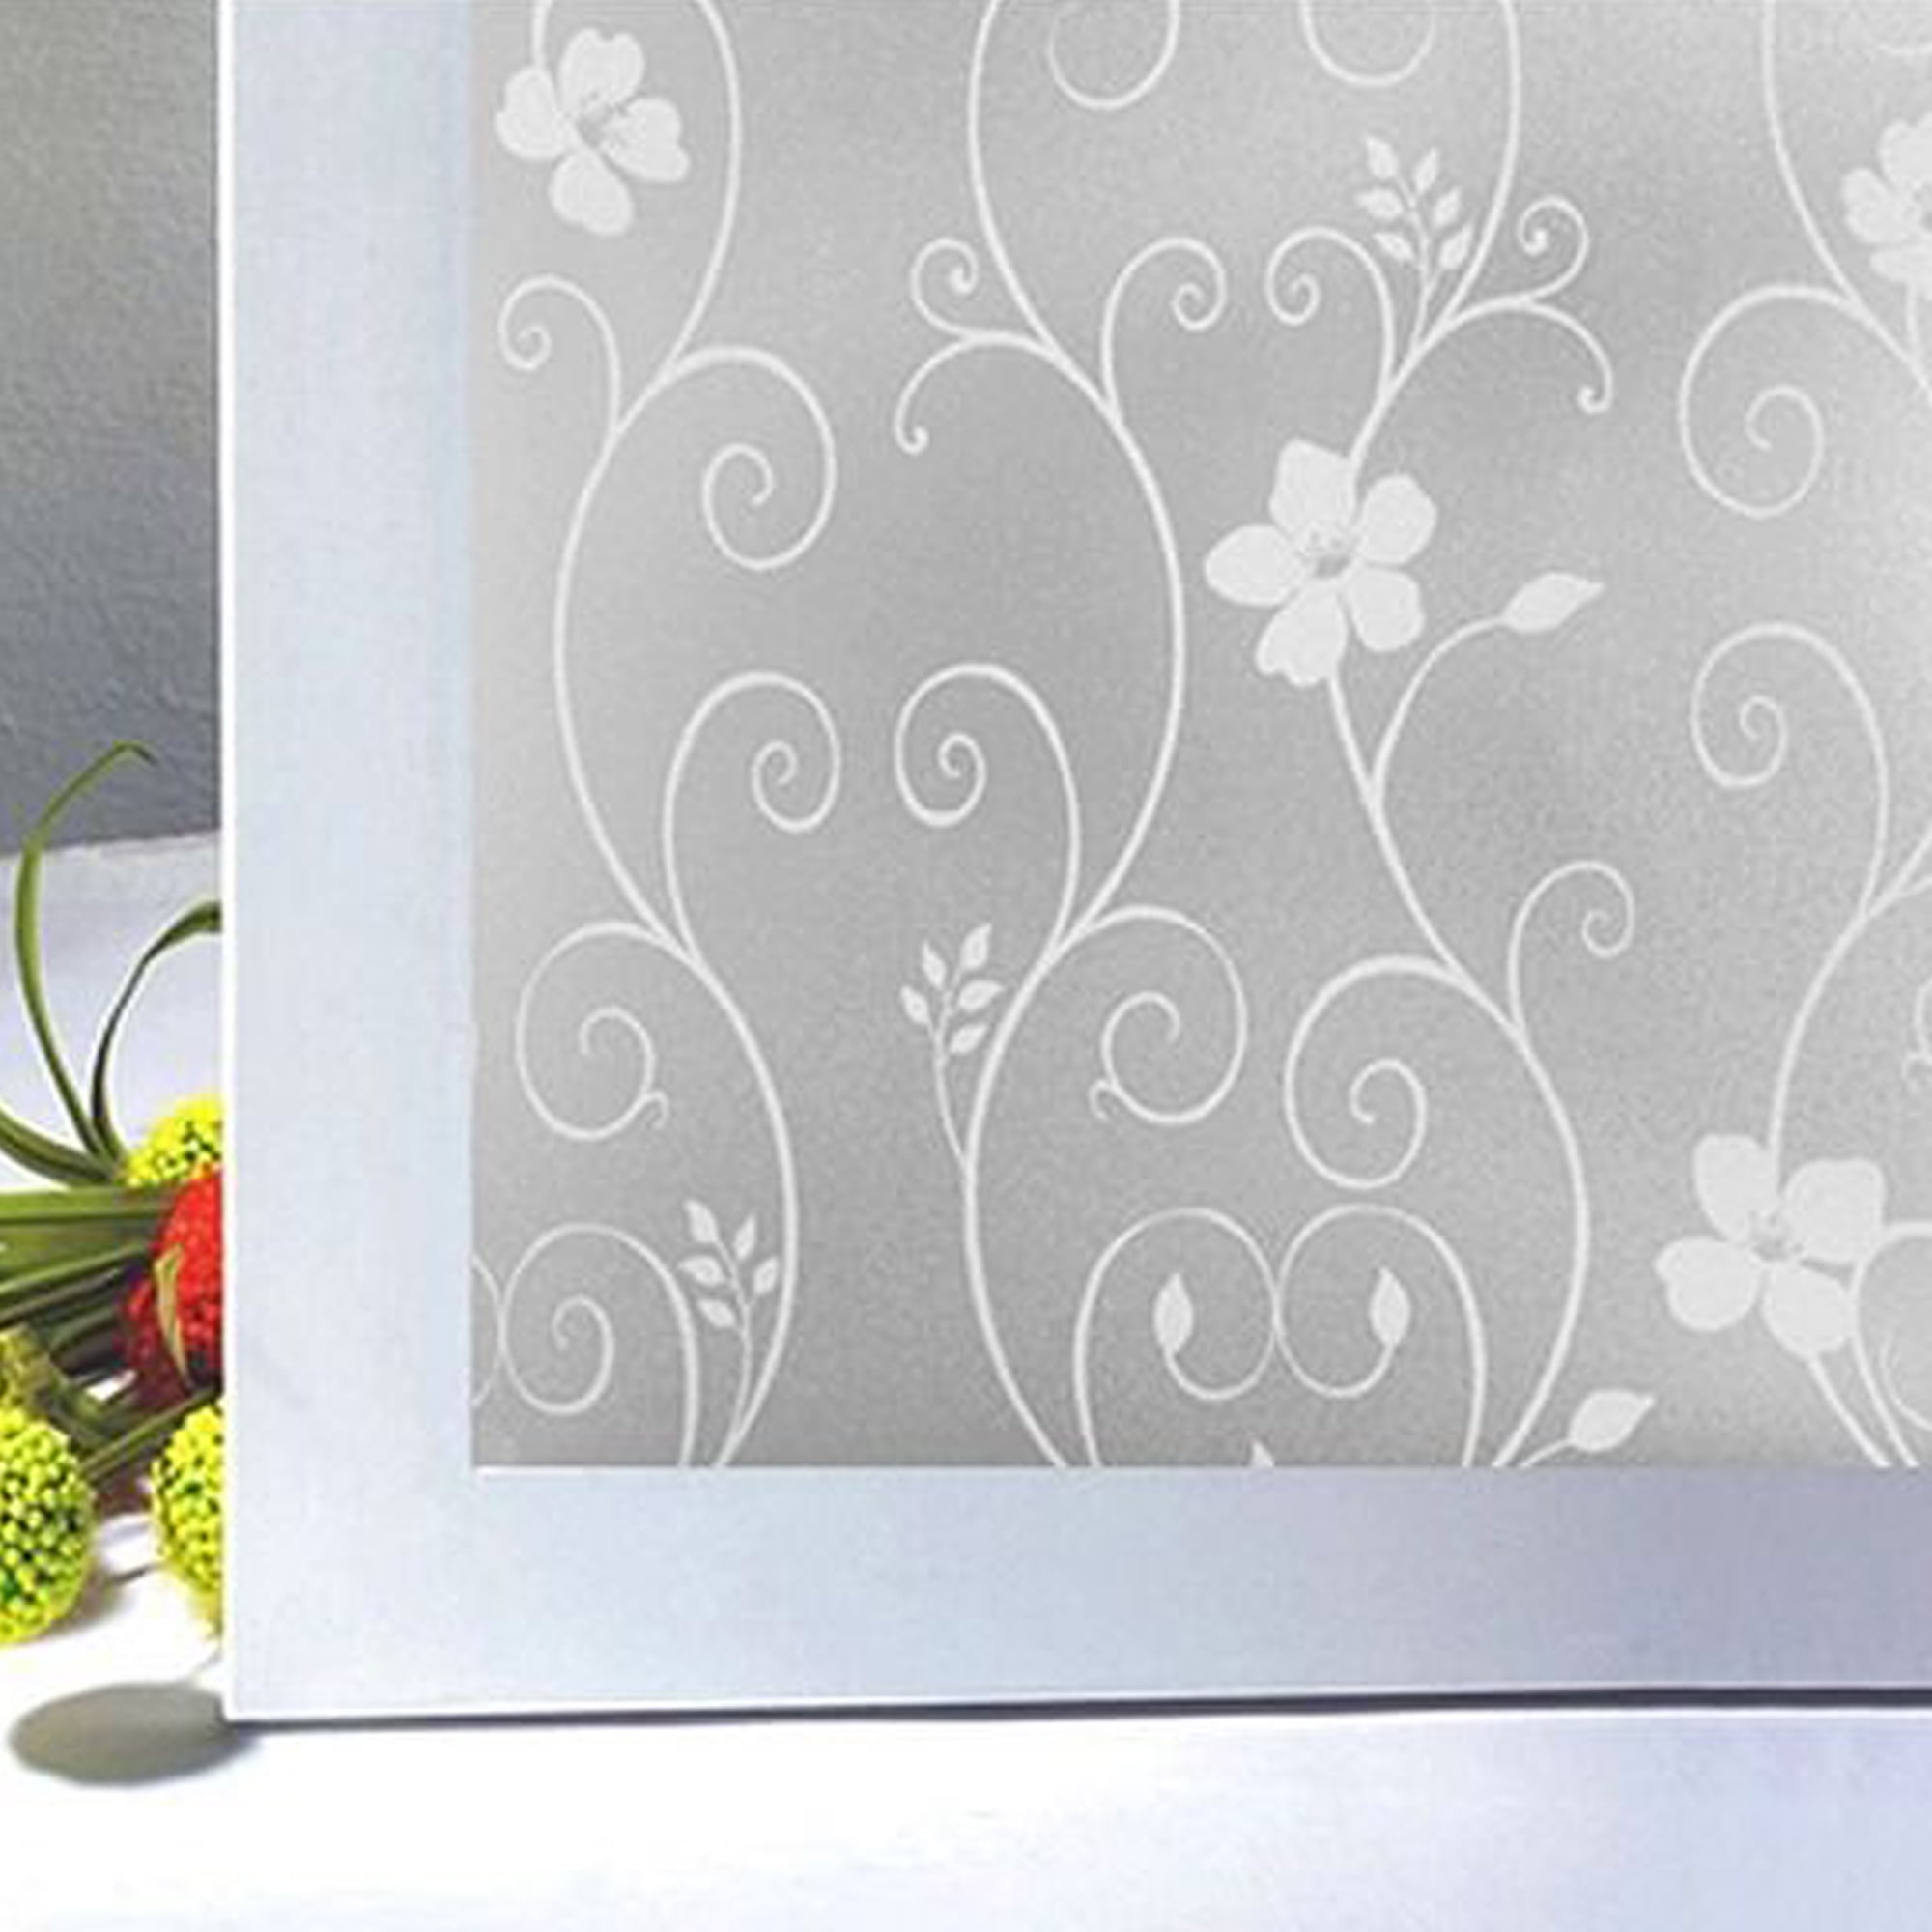 Details about   Waterproof Frosted Privacy Window Lot Glass Cling Cover Film Home PVC Sticker US 